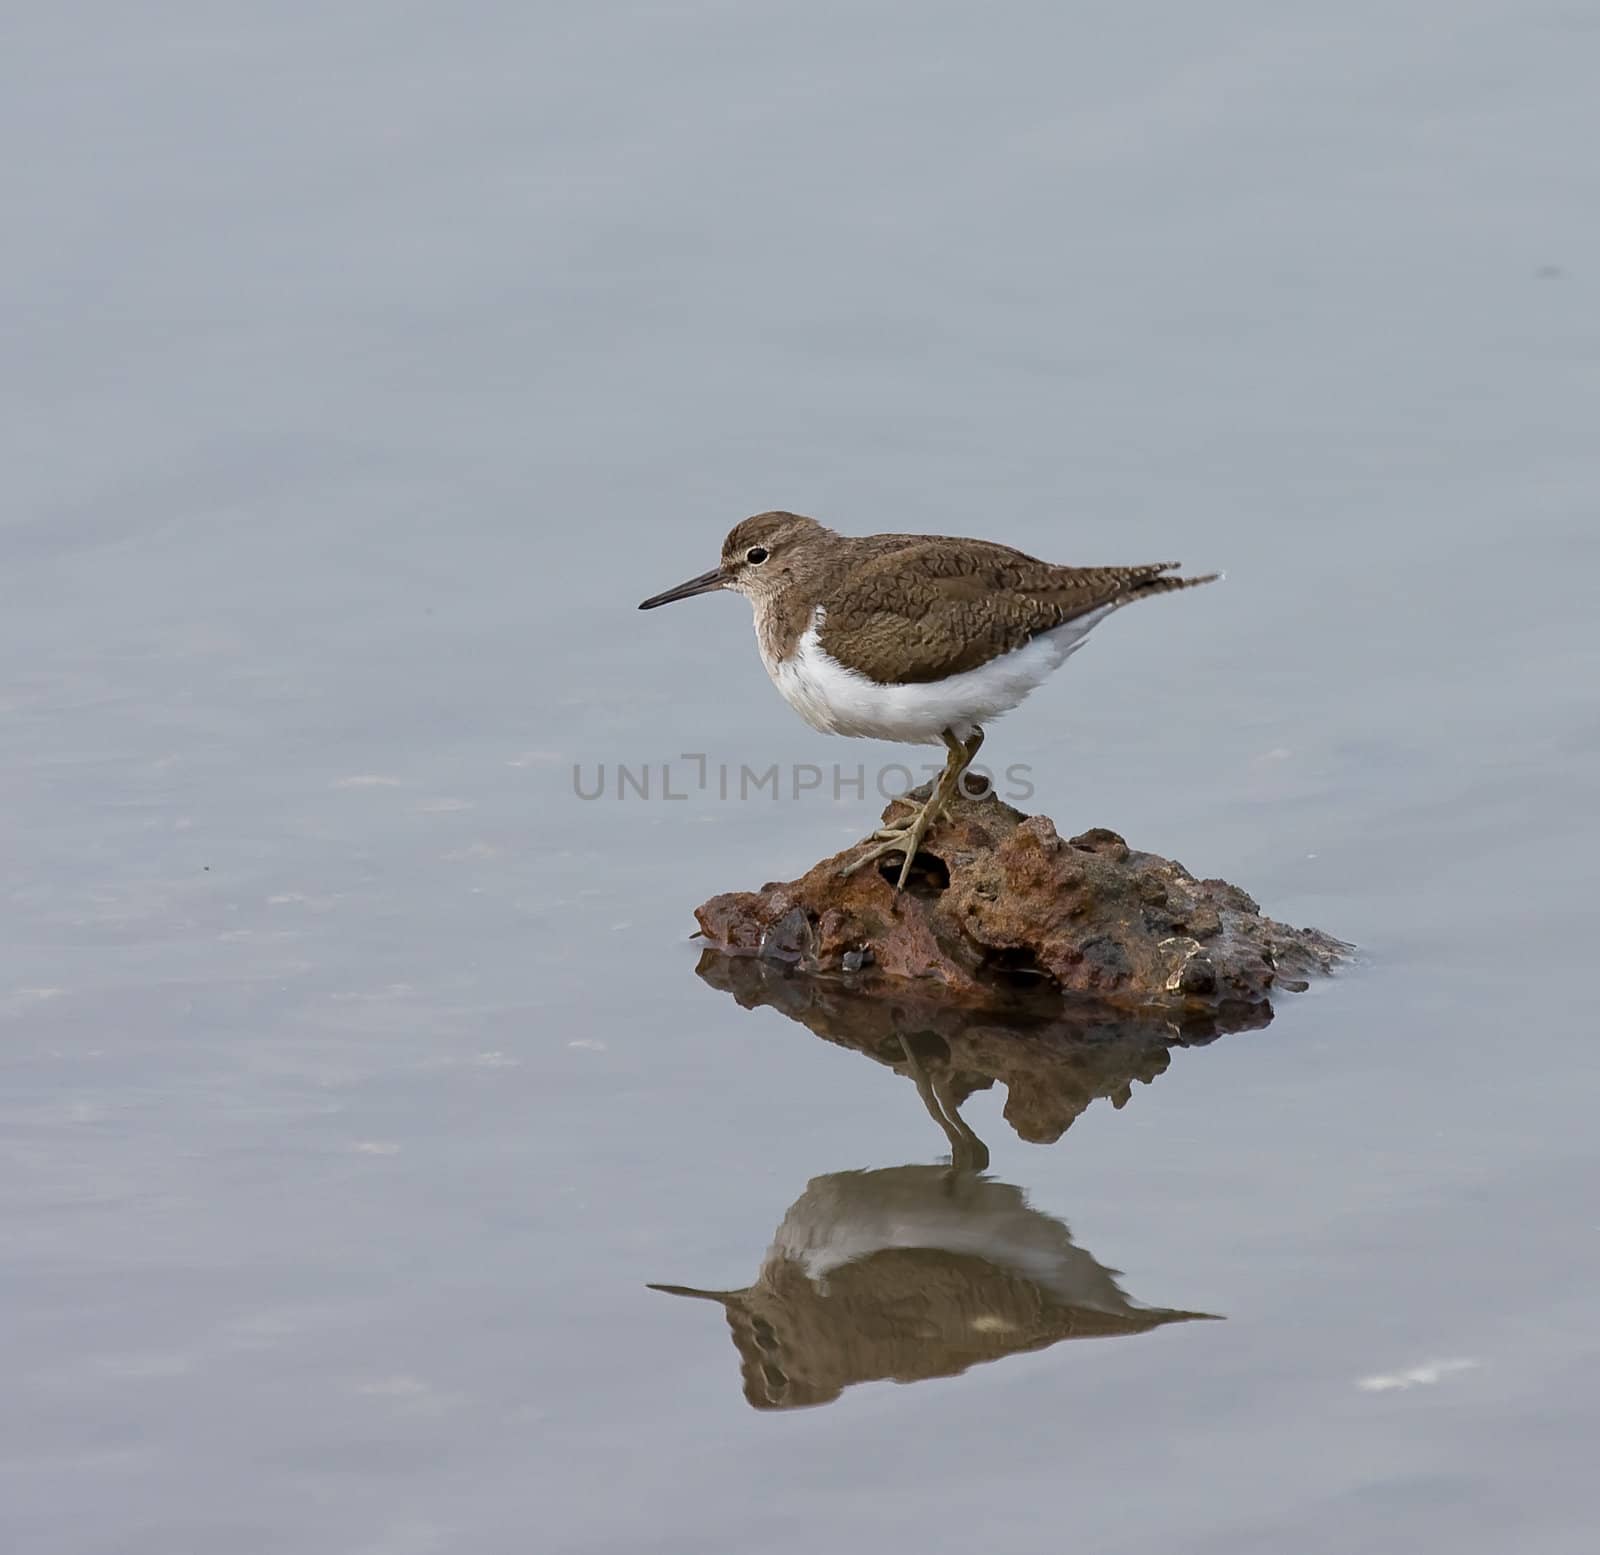 Common Sandpiper at Kotu, on rock with reflection